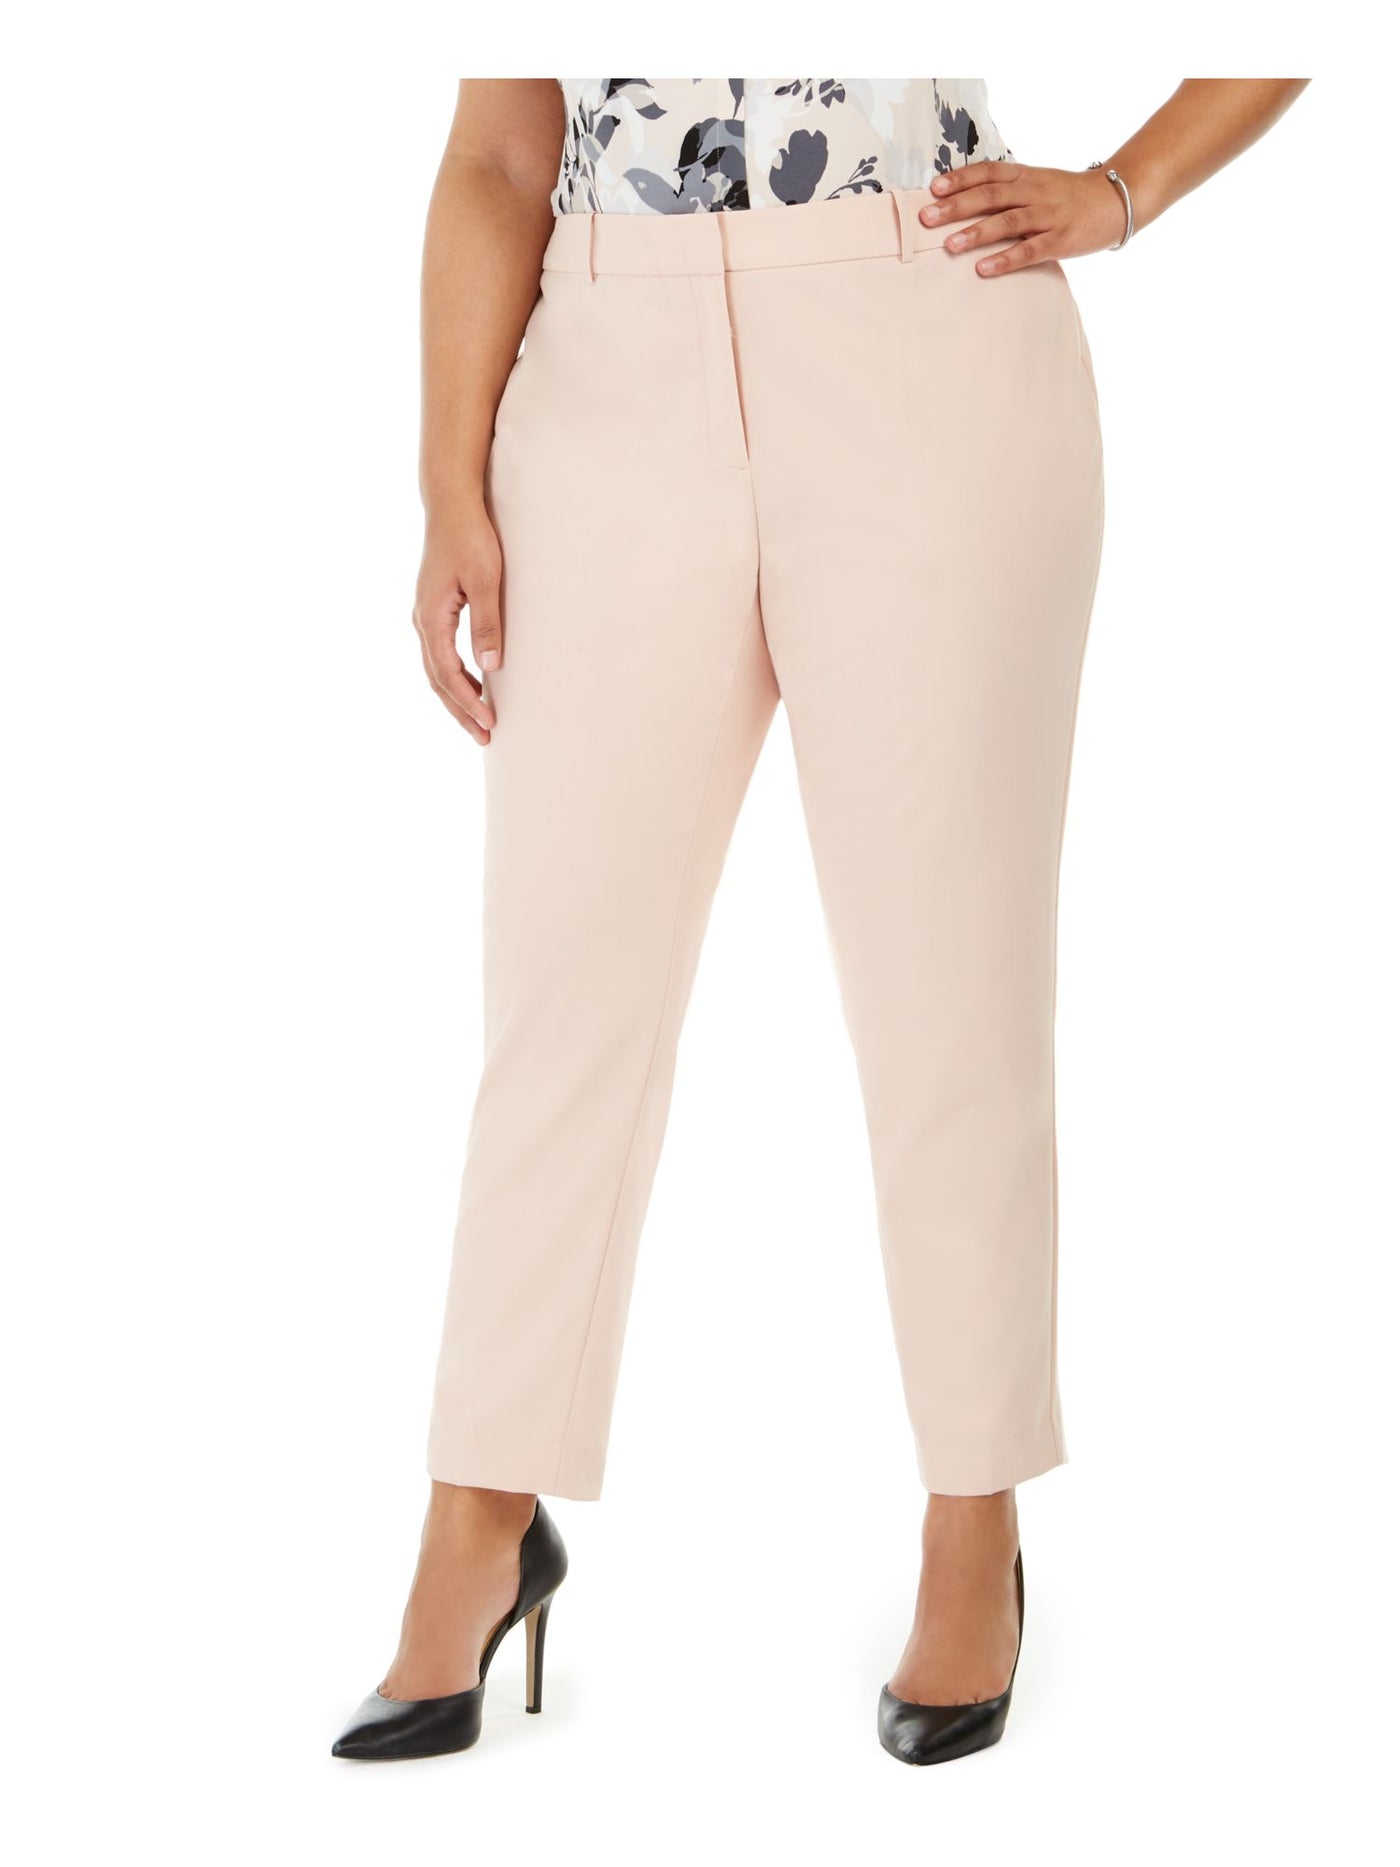 CALVIN KLEIN Womens Pink Stretch Zippered Pocketed Wear To Work Straight leg Pants Plus 20W